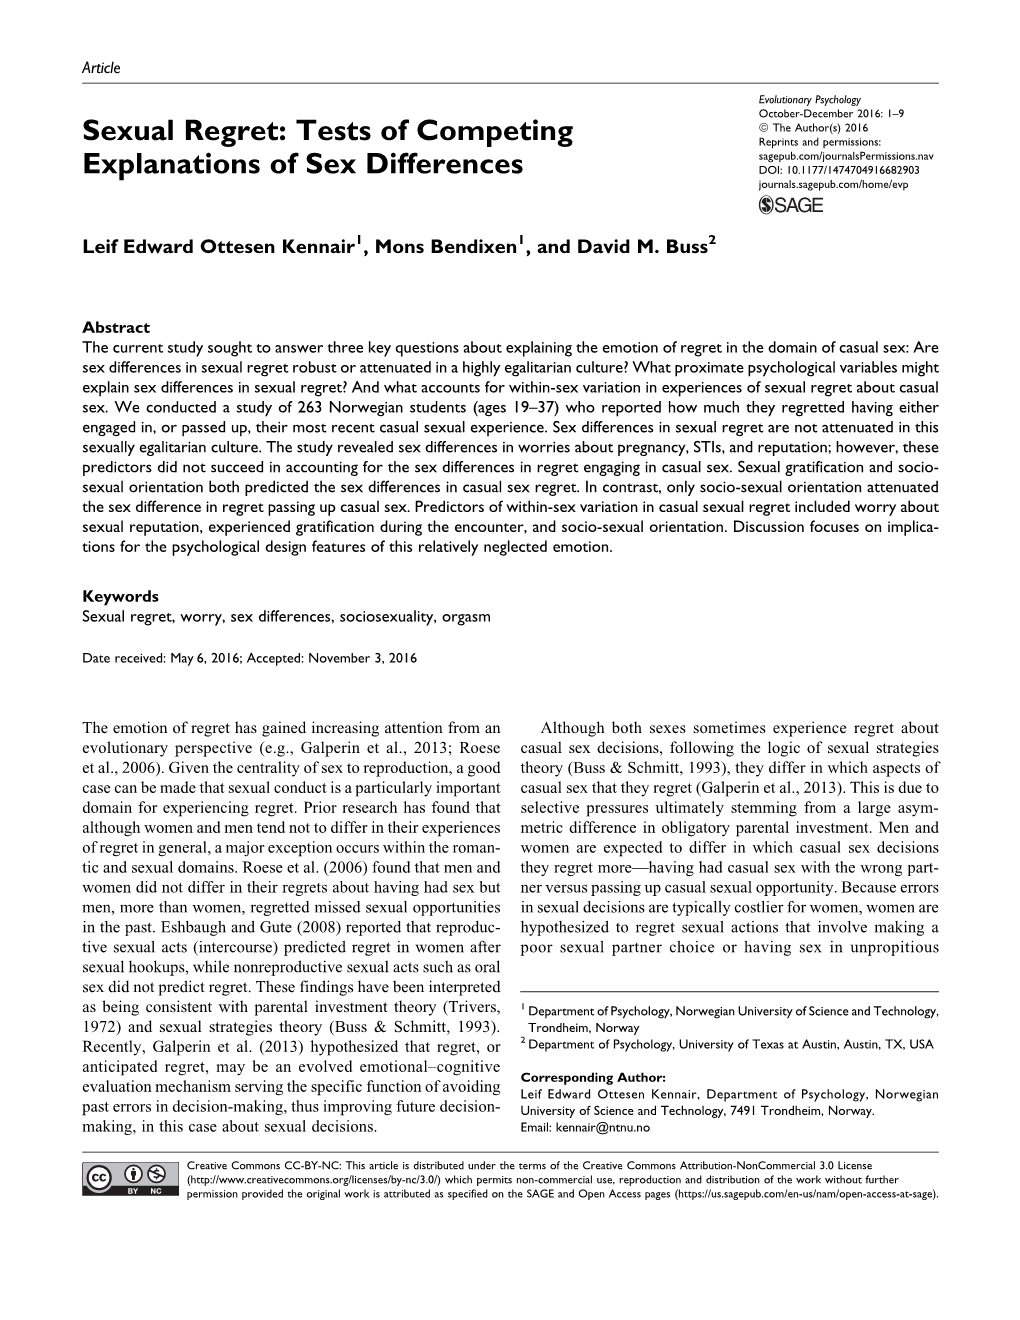 Sexual Regret: Tests of Competing Explanations of Sex Differences